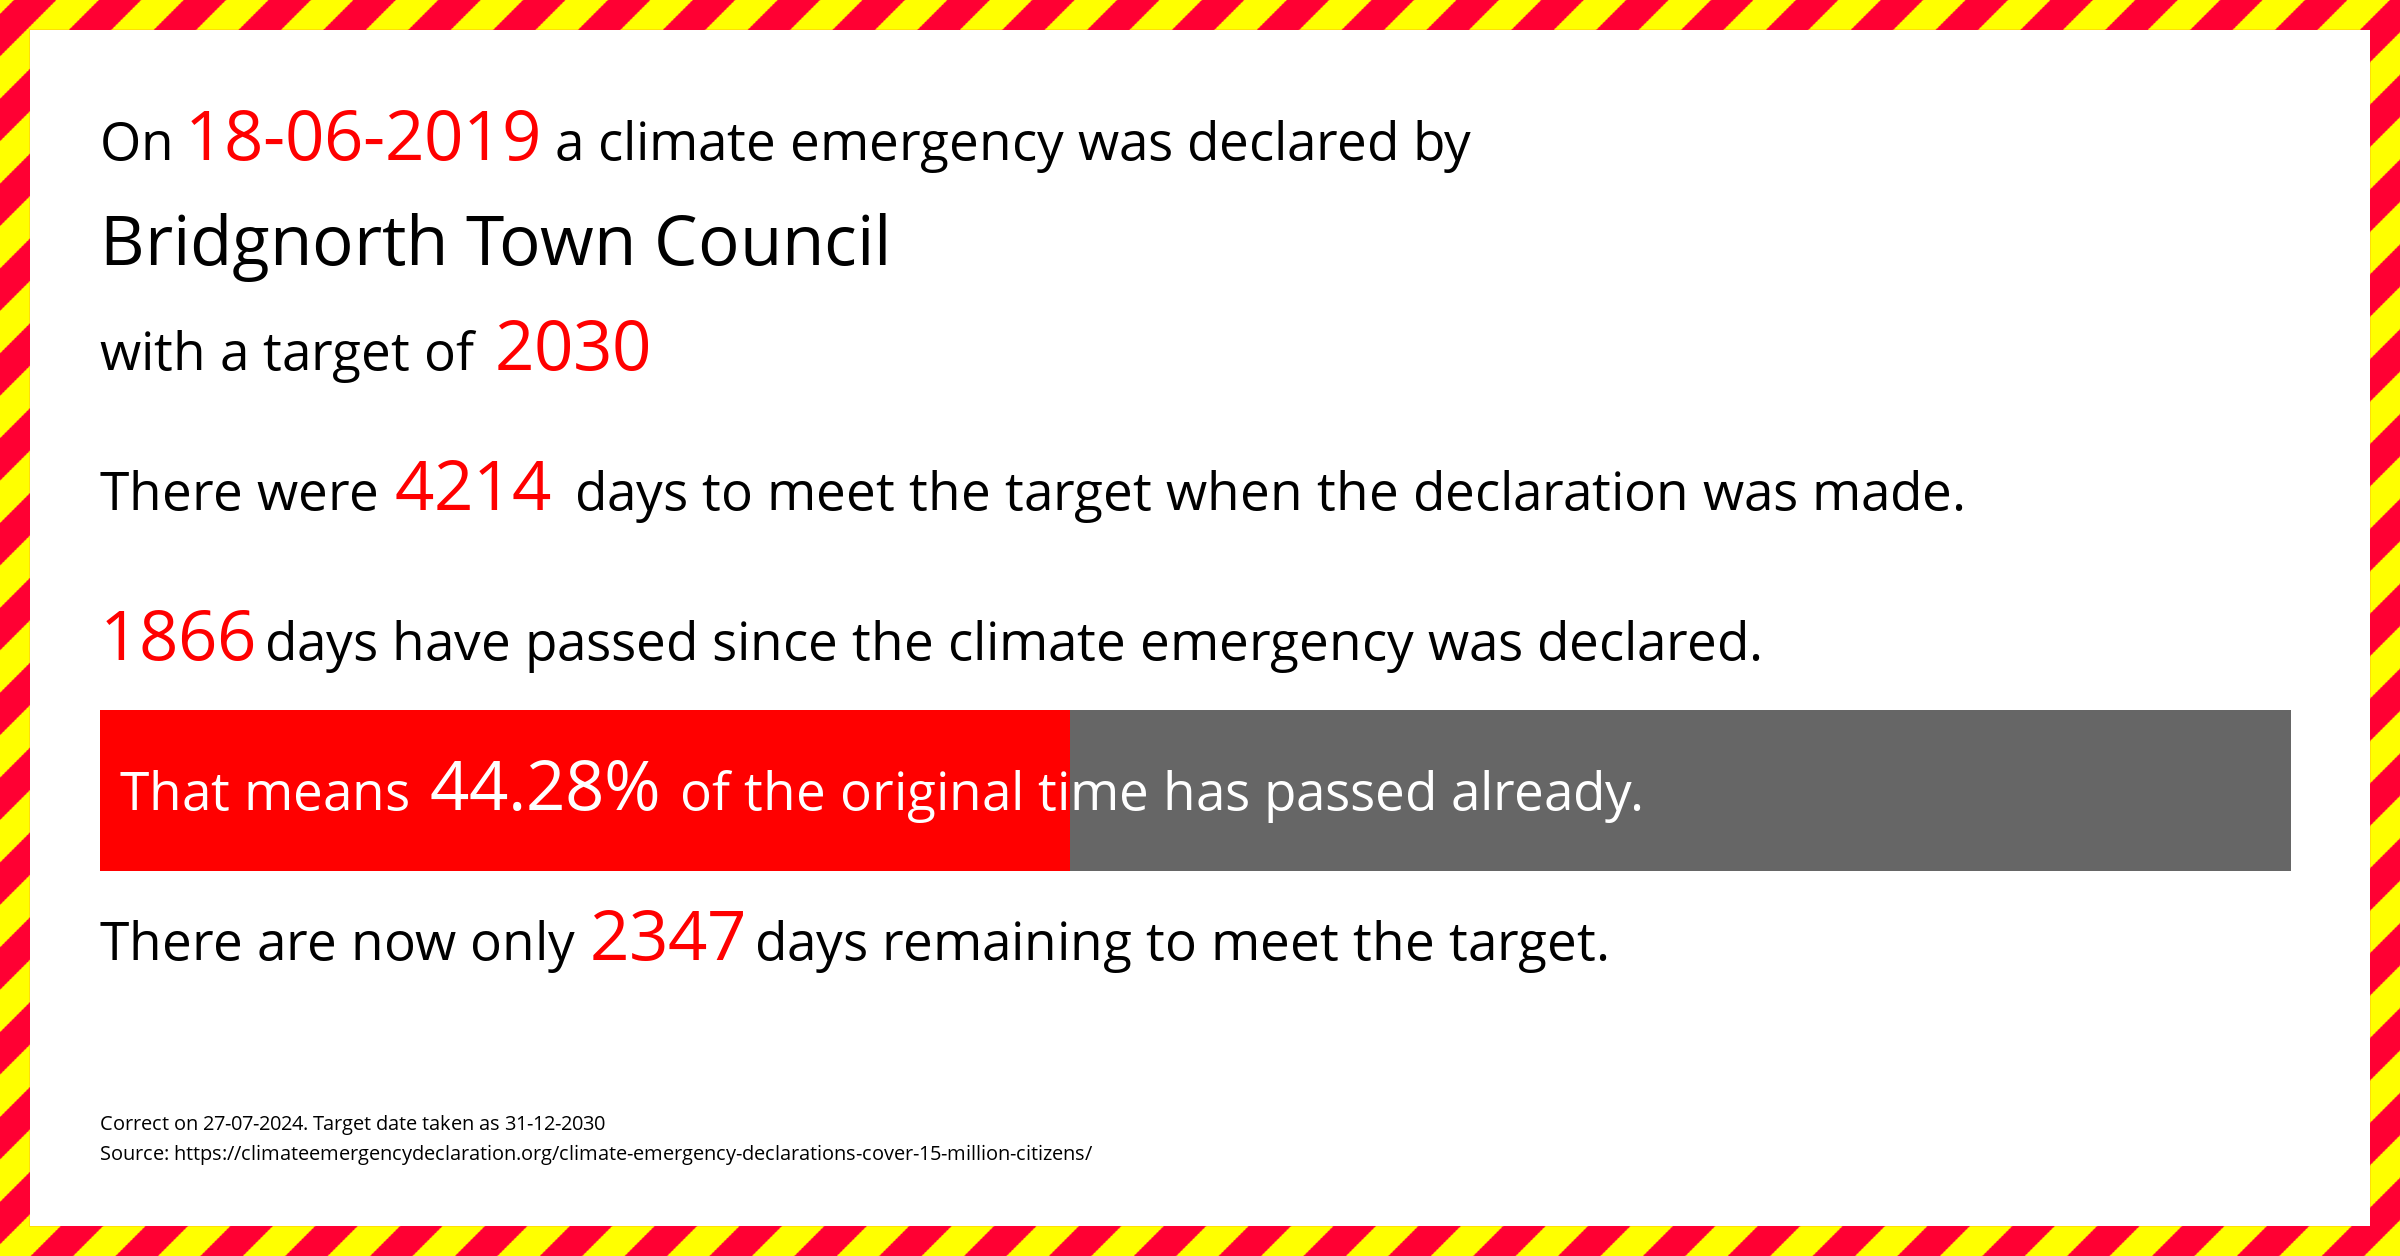 Bridgnorth Town Council declared a Climate emergency on Tuesday 18th June 2019, with a target of 2030.